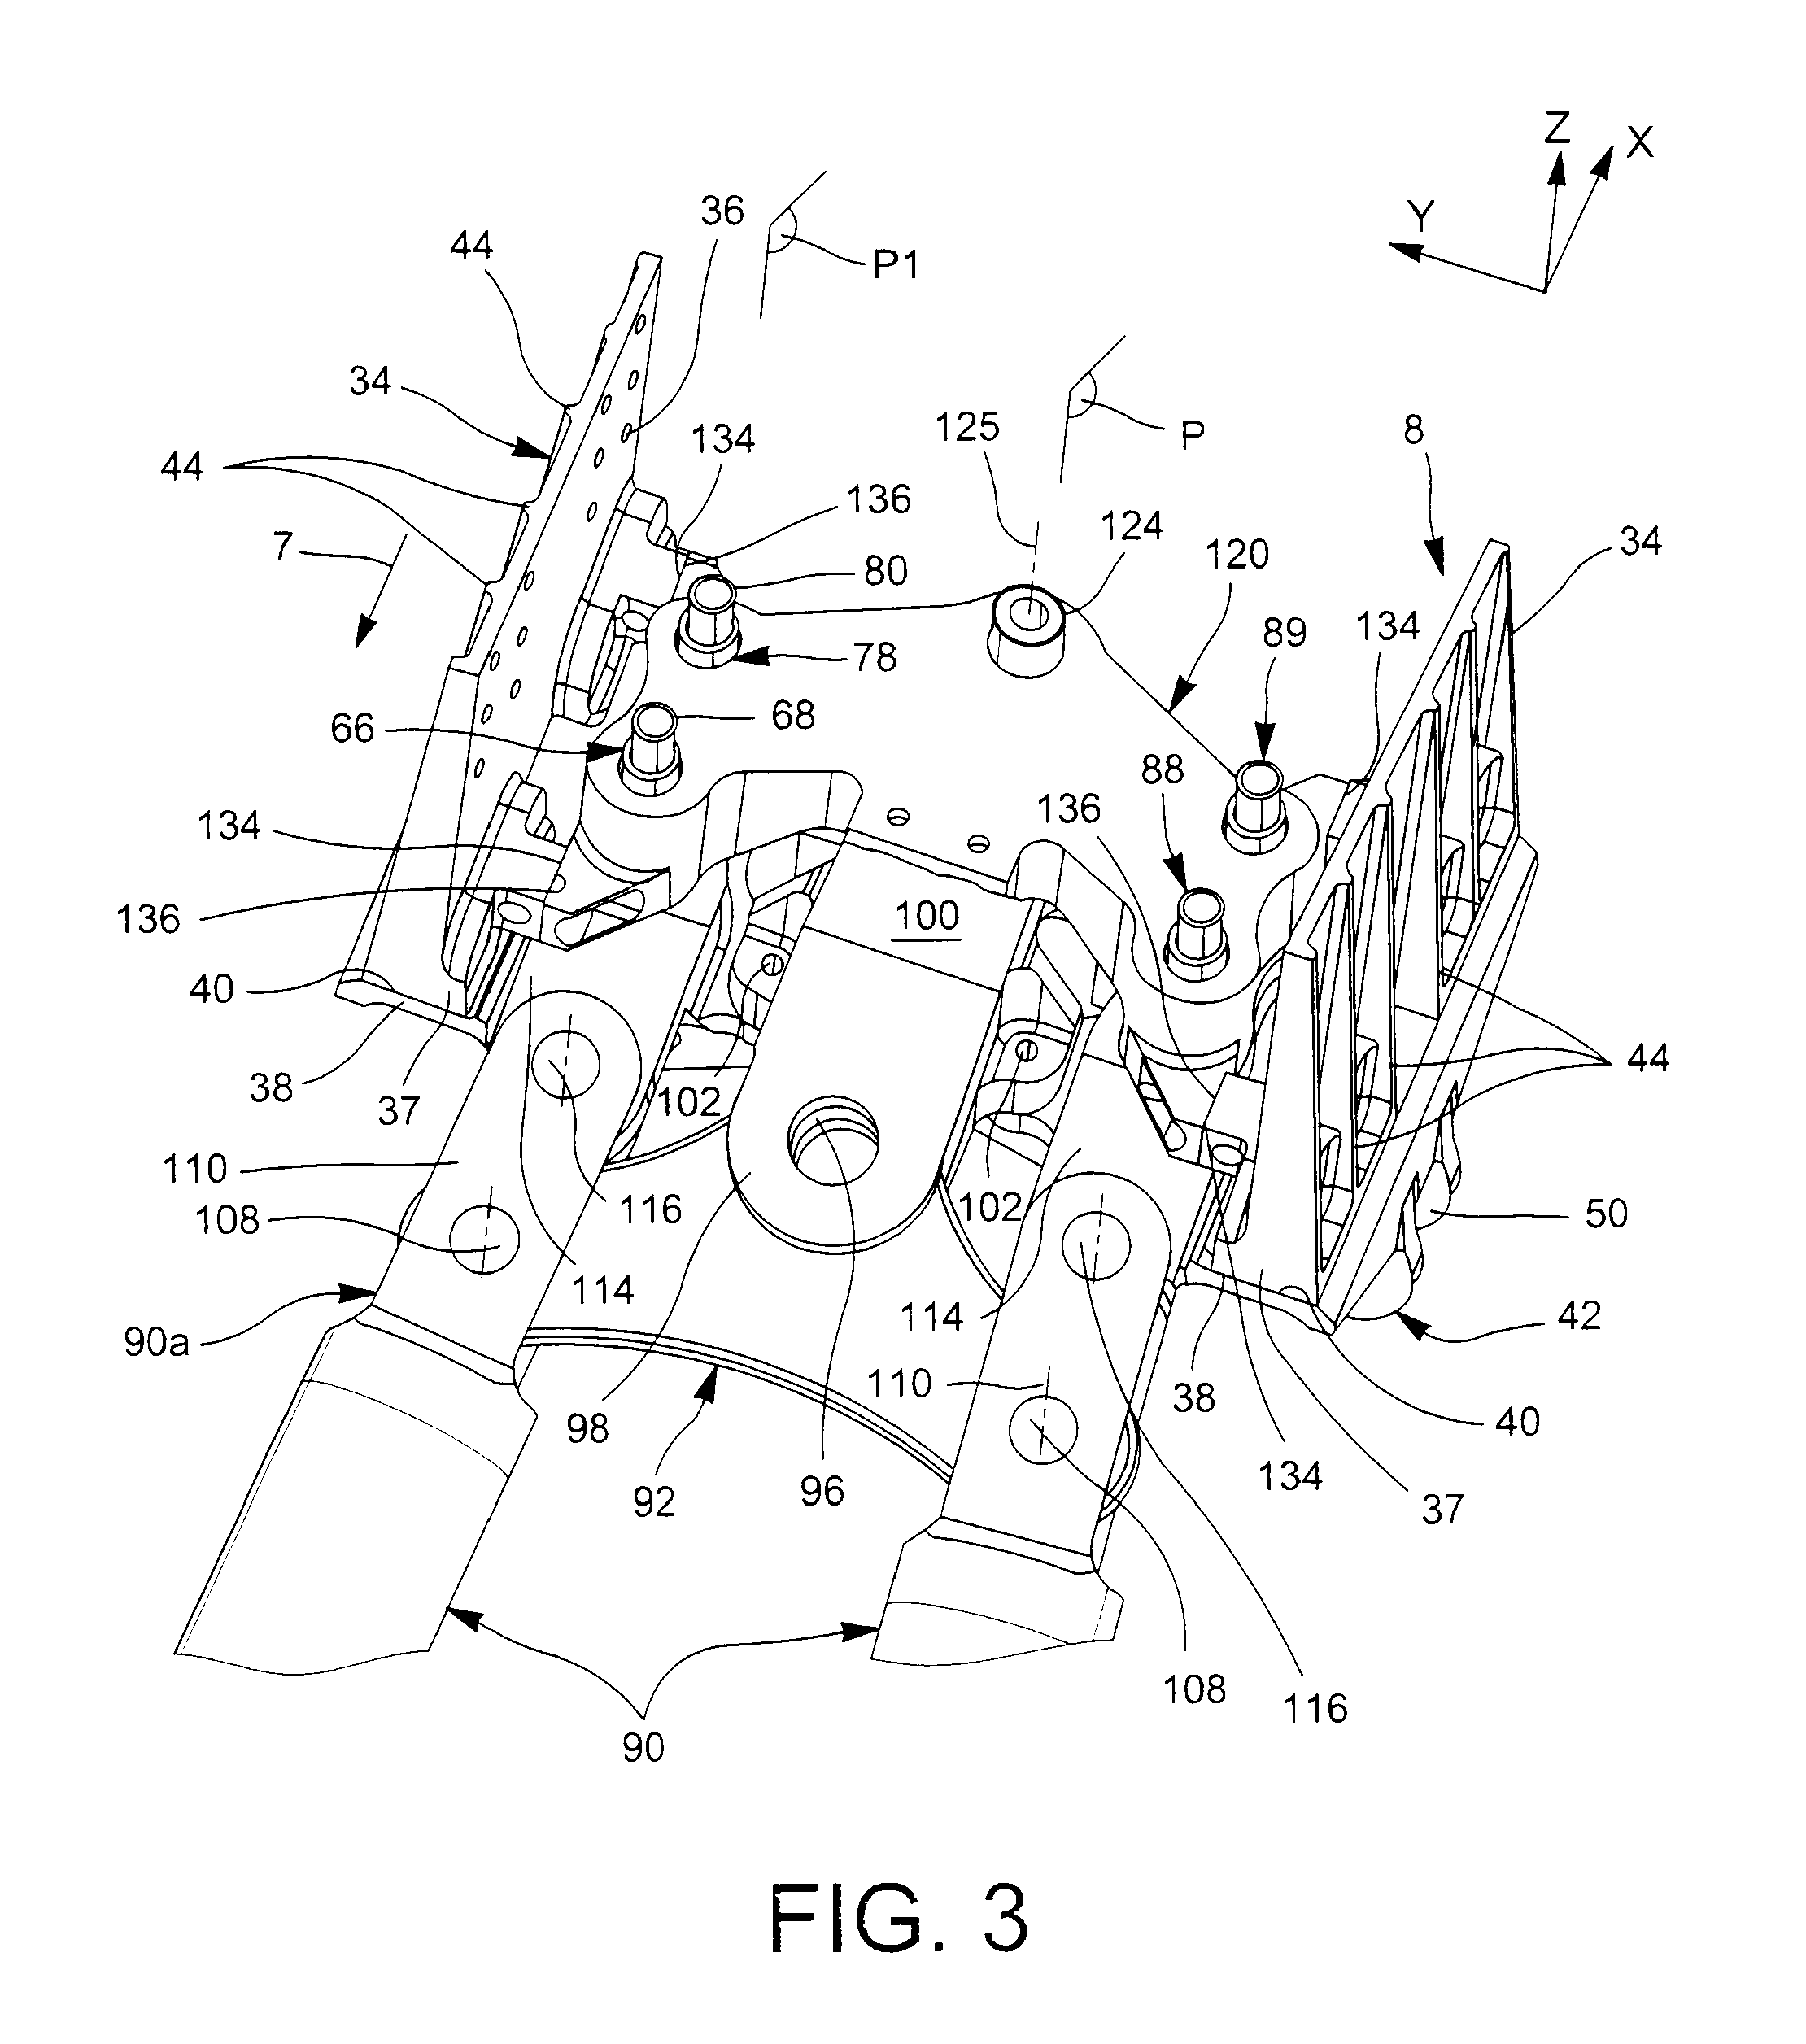 Attachment pylon for aircraft having a rear engine attachment beam offset from the caisson